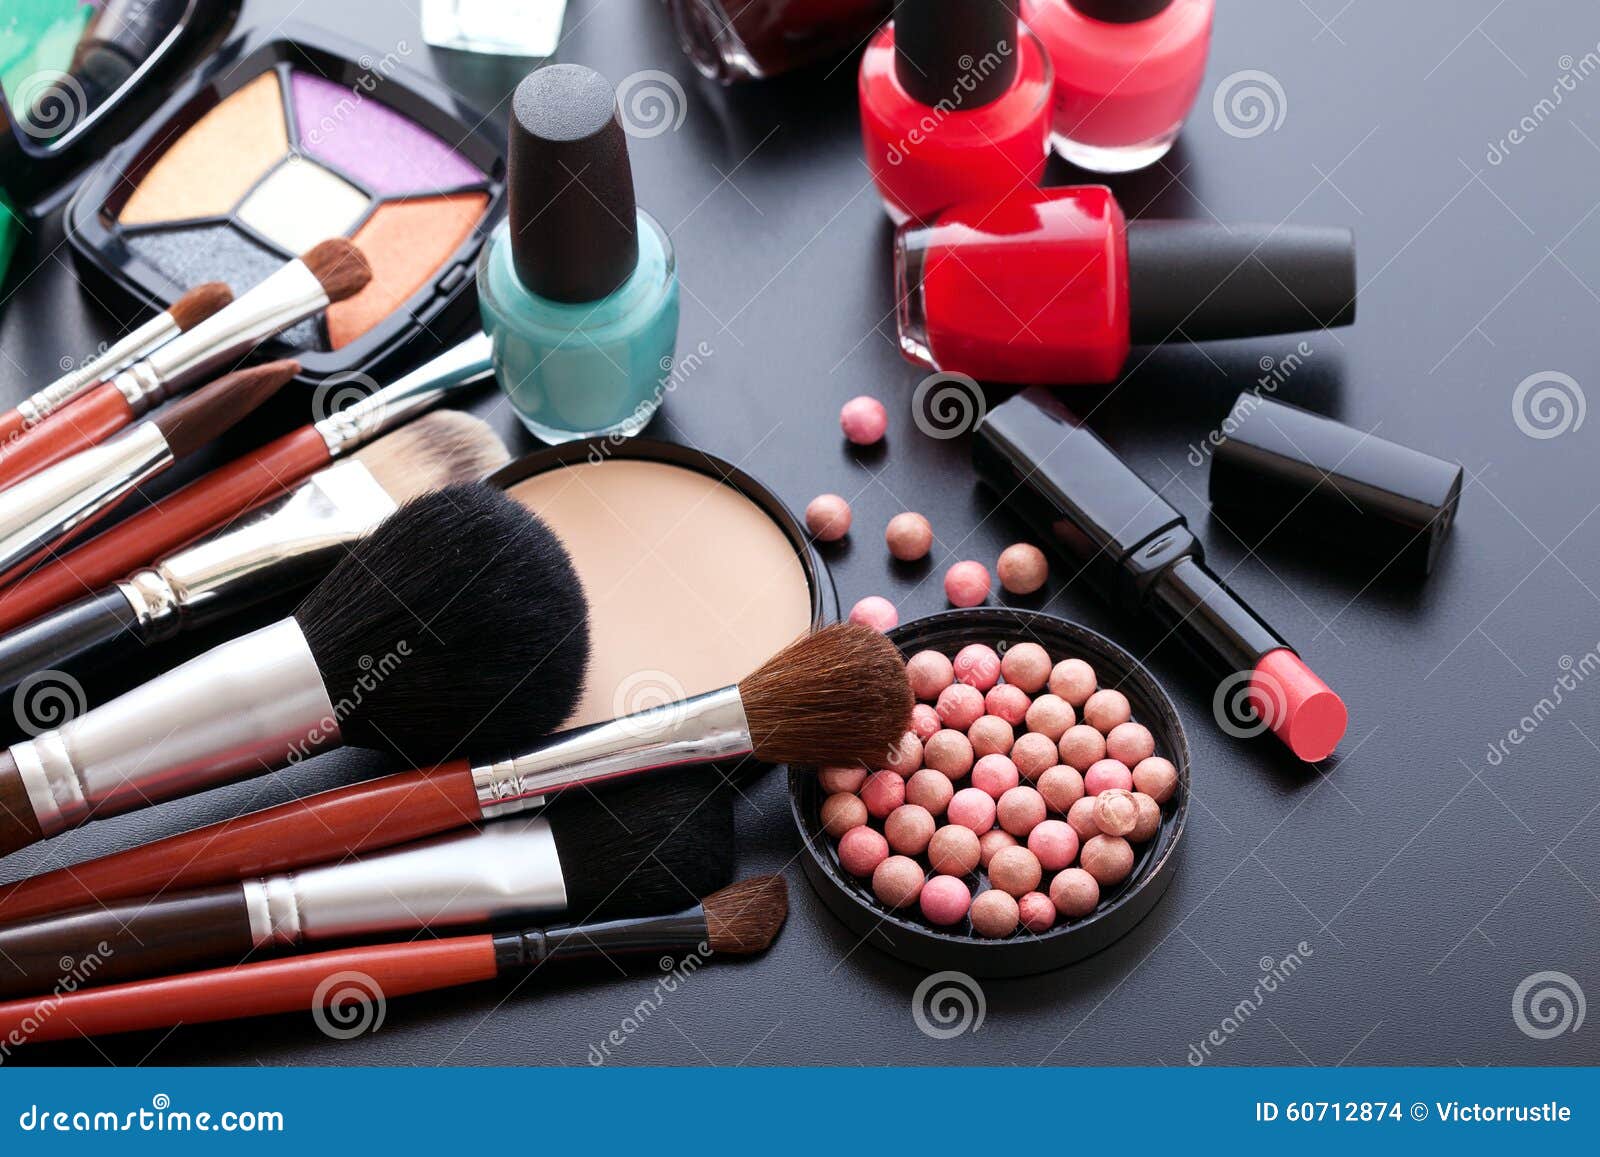 Cosmetics Make Up On Black Background Top View Stock Photo Image